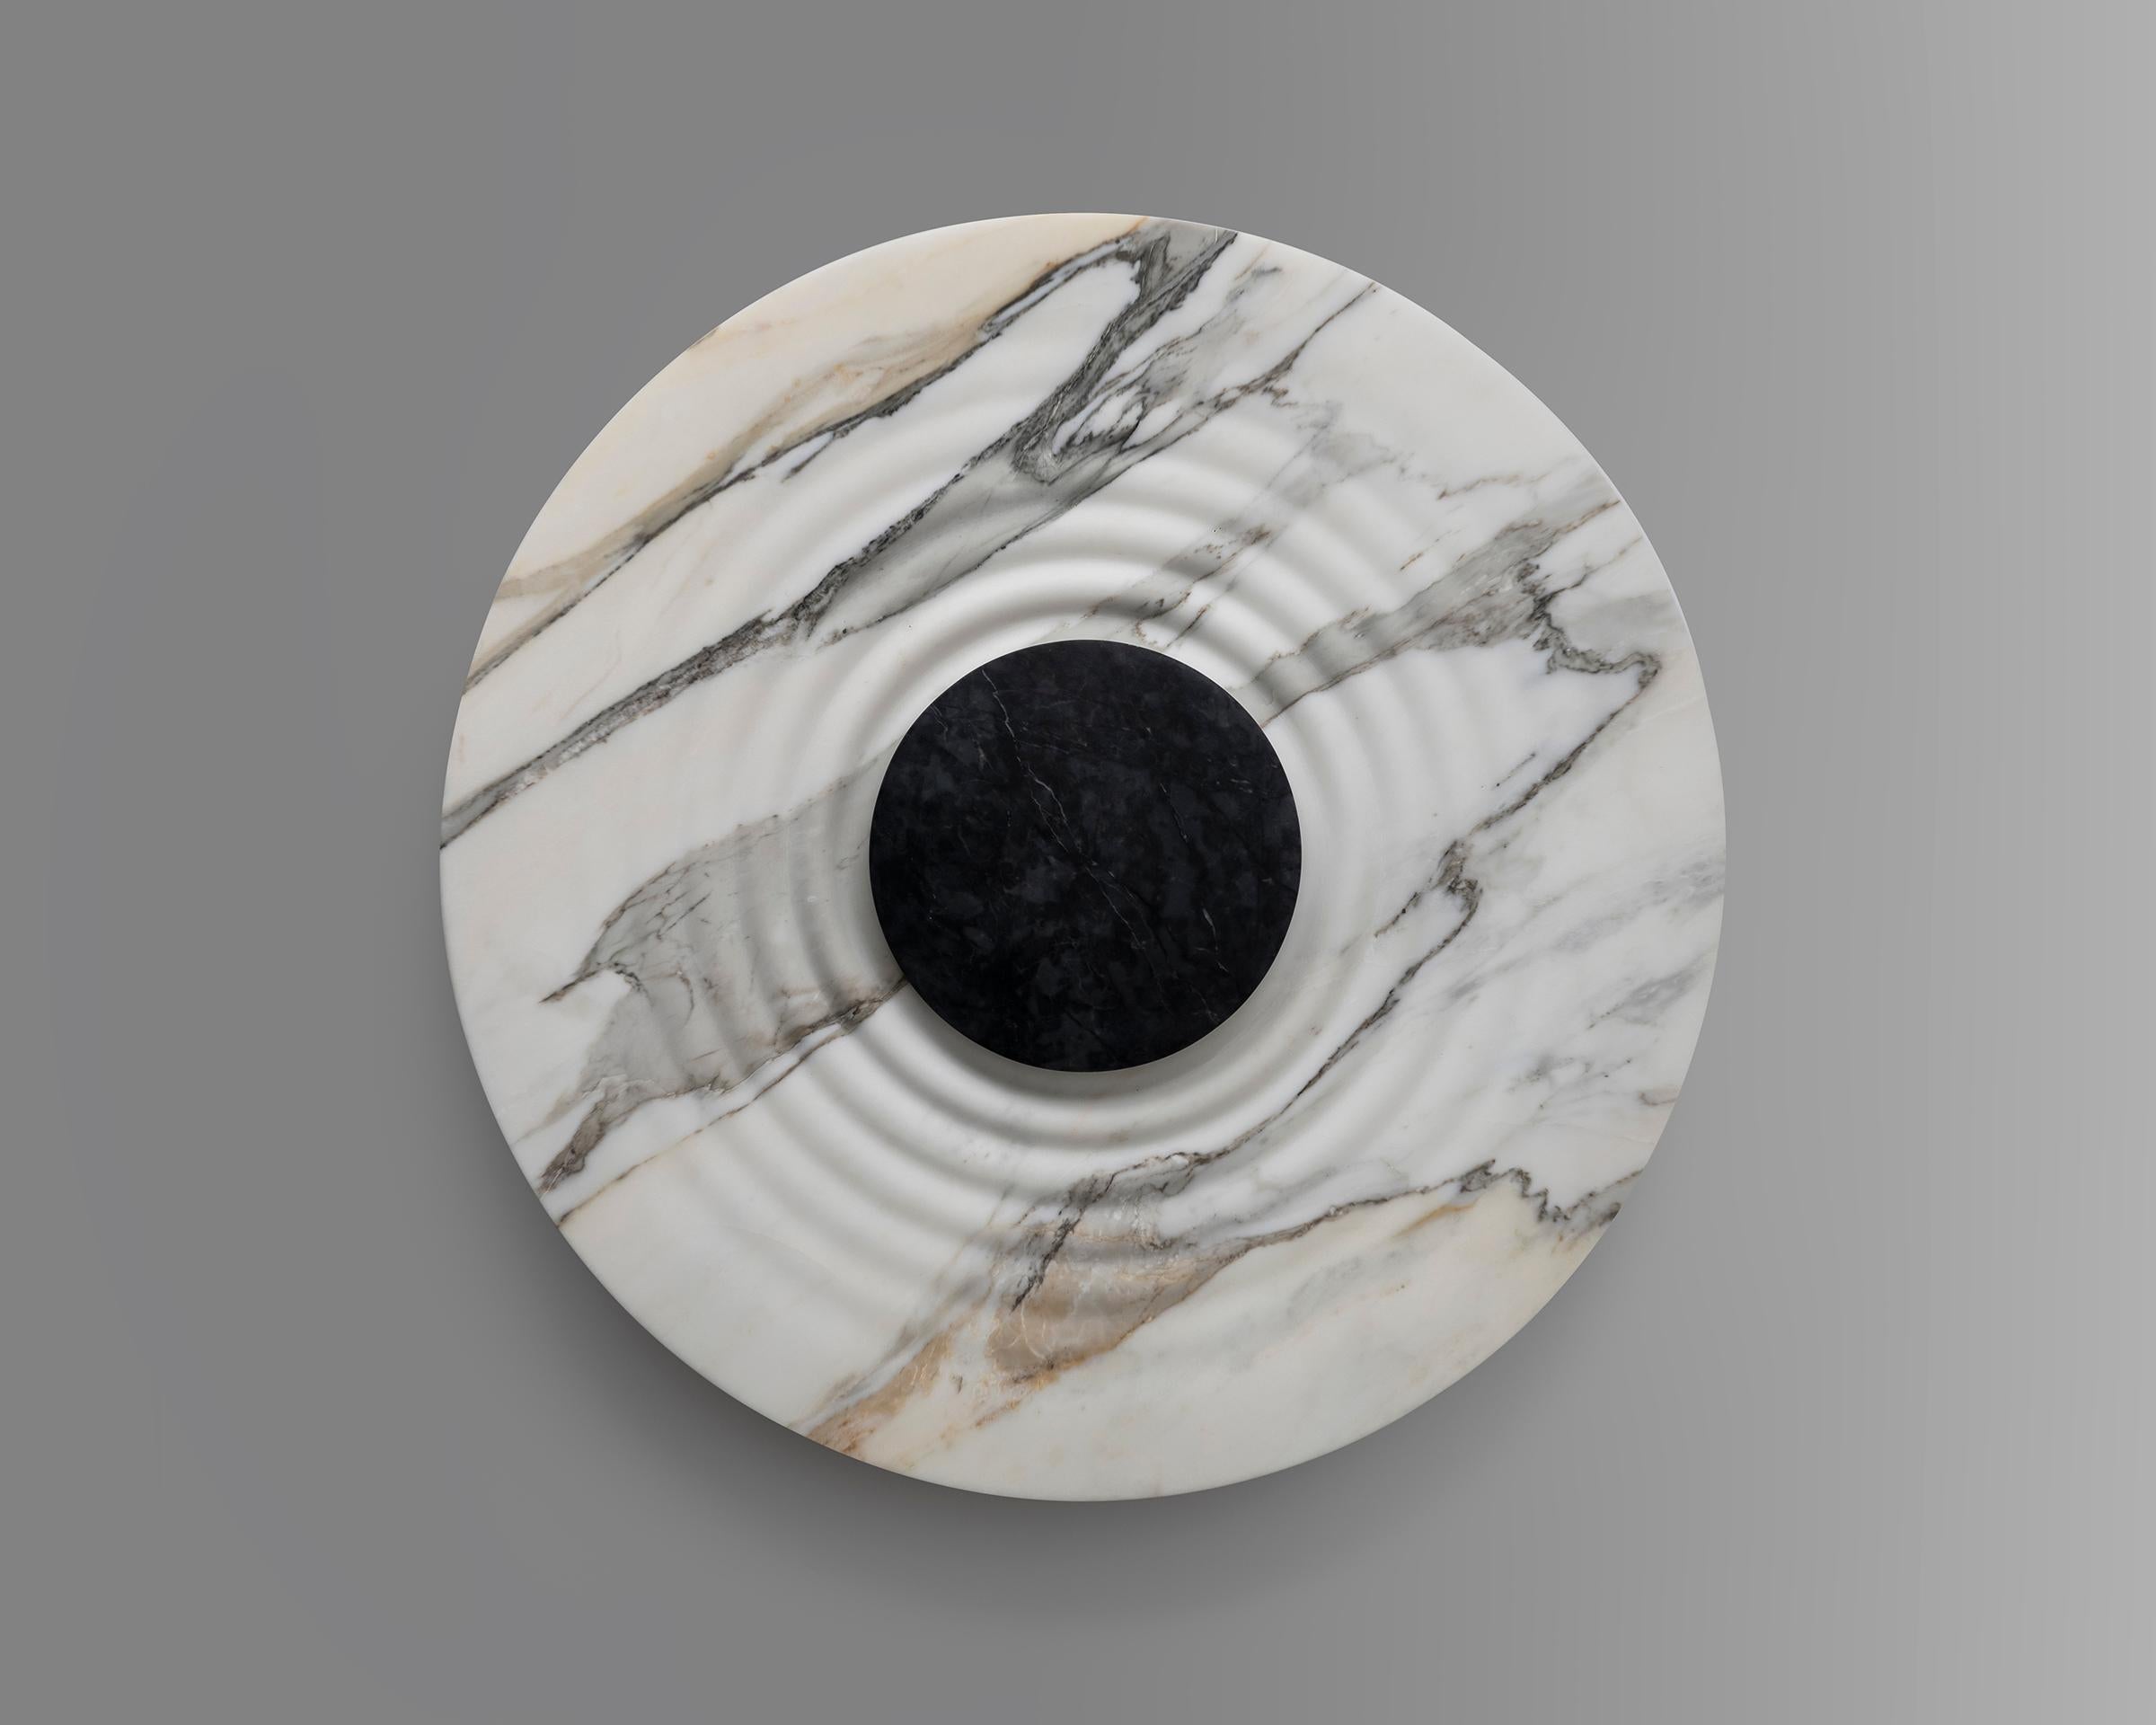 Messier Marble M50 Sconce by Etamorph
Dimensions: Ø 50 x D 10 cm.
Materials: Calacata Marble and Black Matter stone.

Available in Ø 50 and Ø 38 cm. All our lamps can be wired according to each country. If sold to the USA it will be wired for the